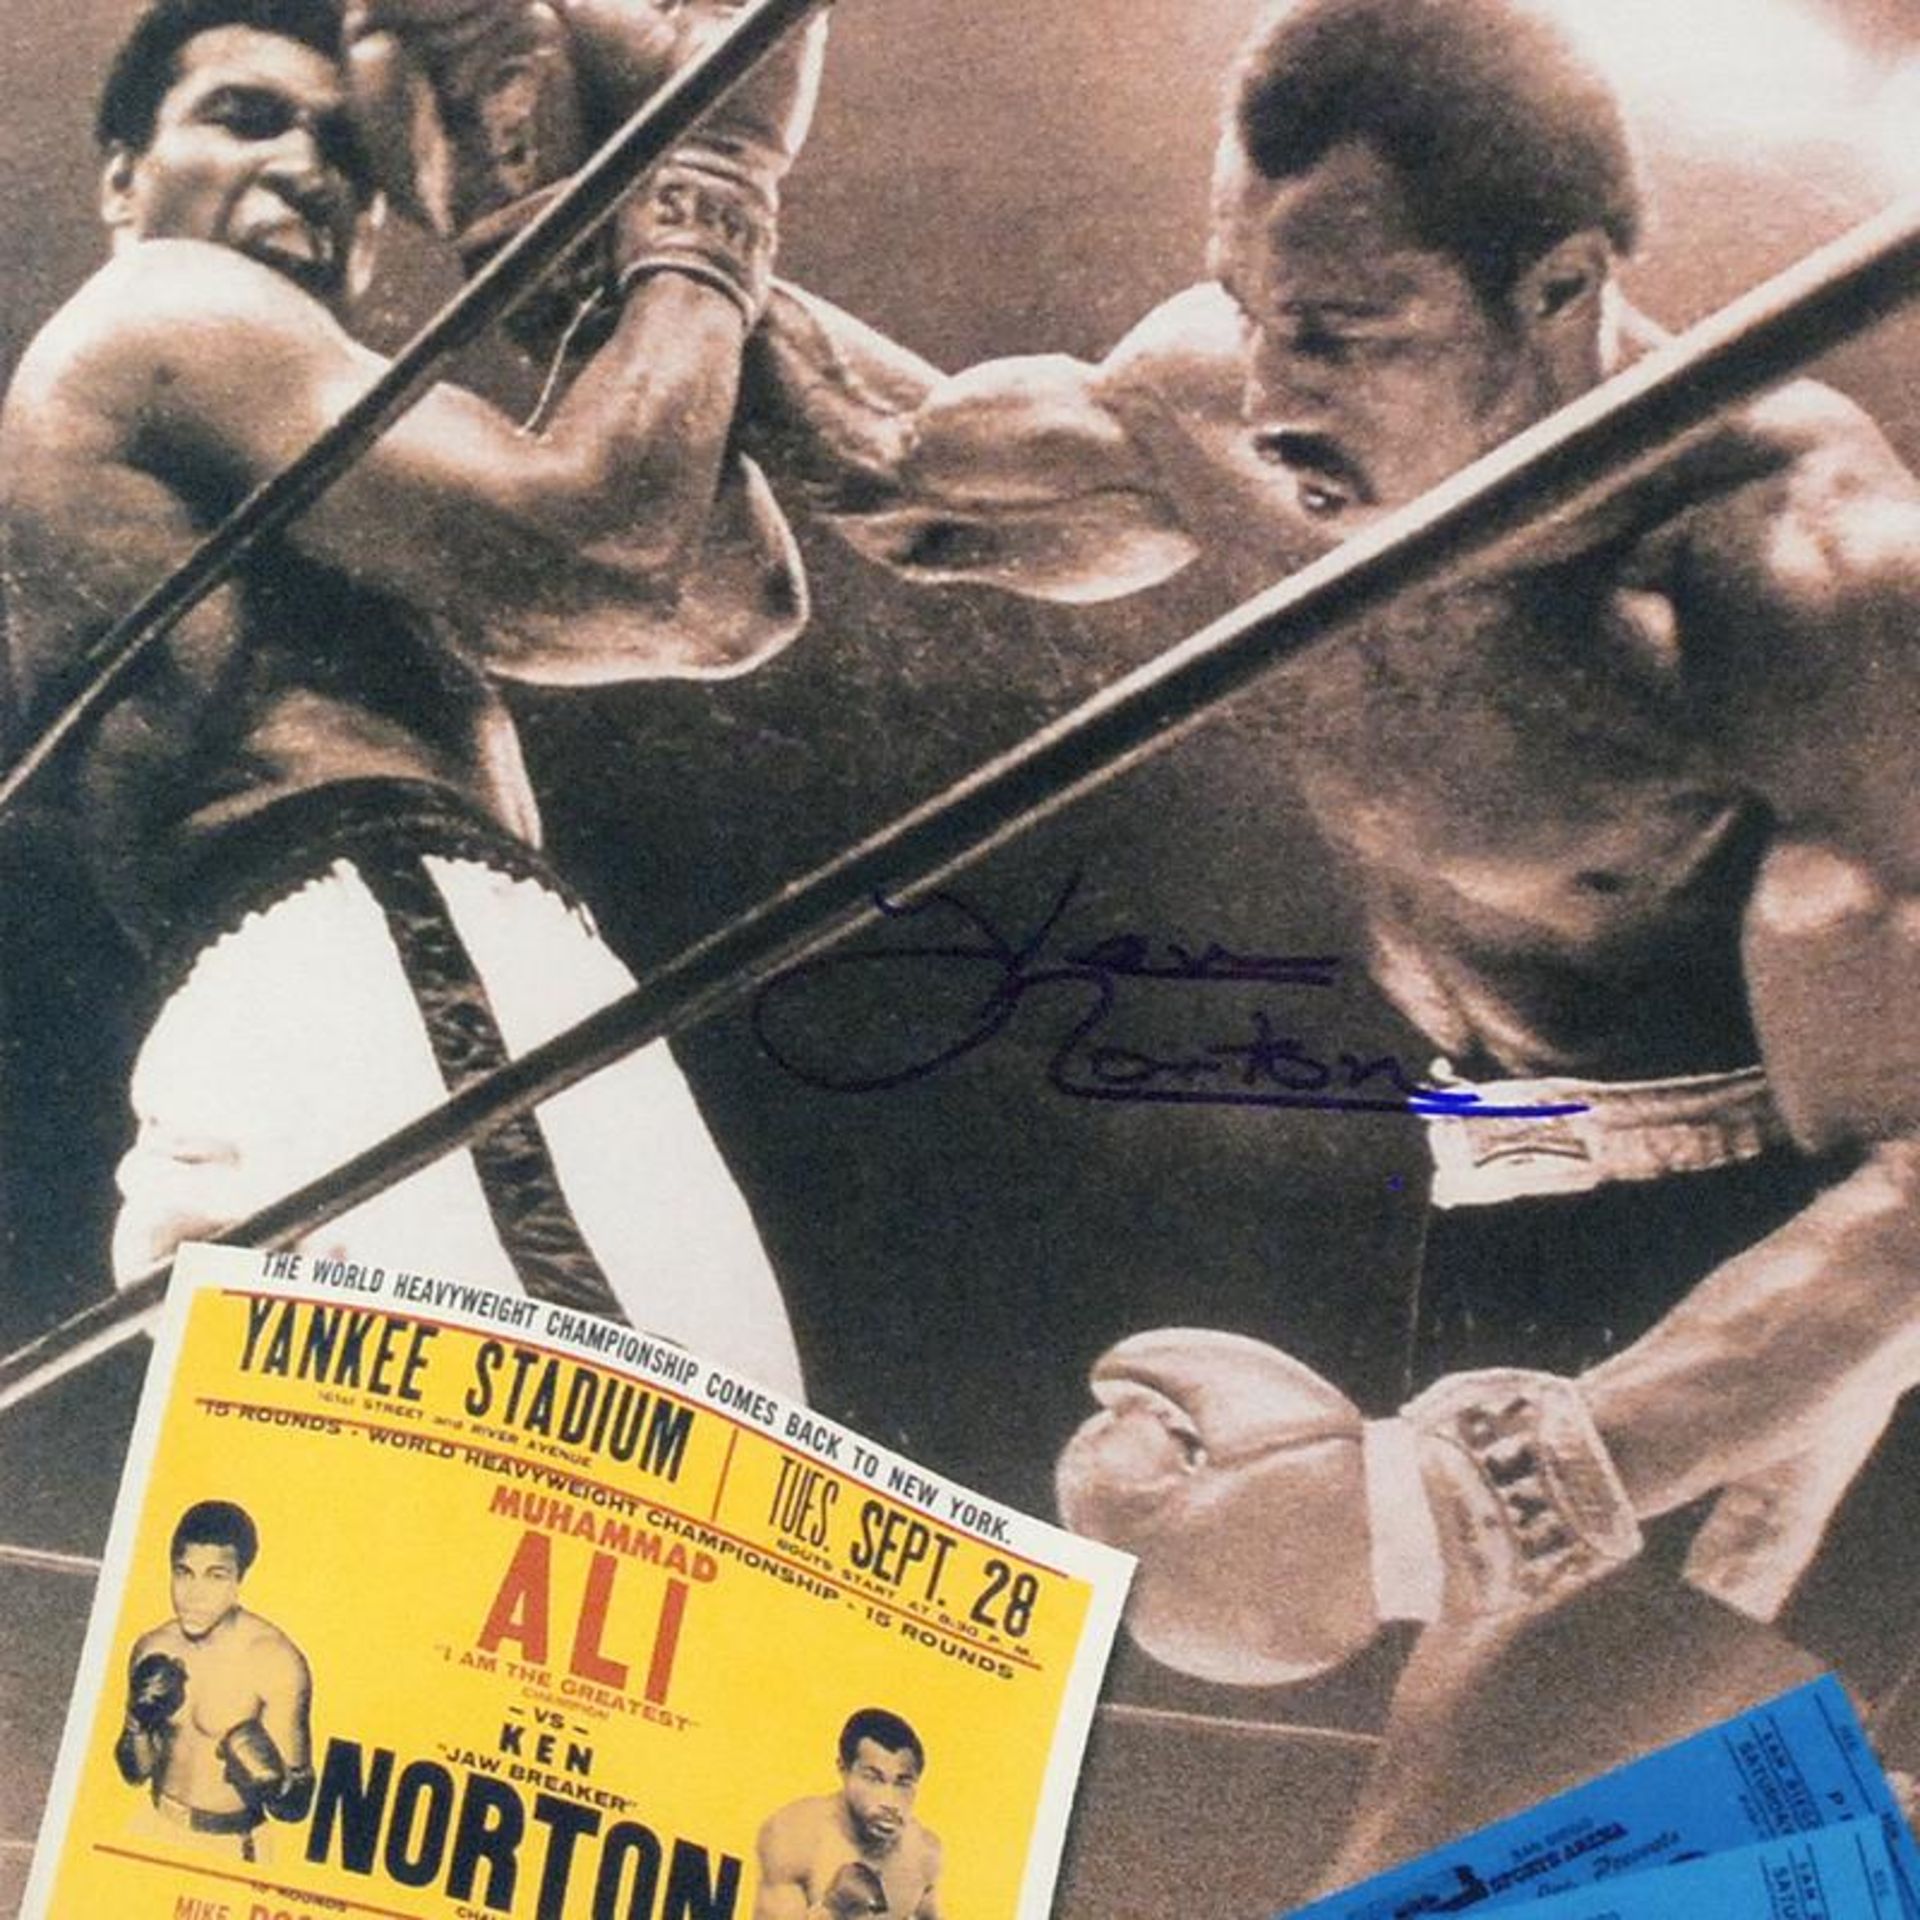 Must-Have Signed Sports Photo Collage. "Ken Norton and Ali Ticket" Hand-Autograp - Image 2 of 2